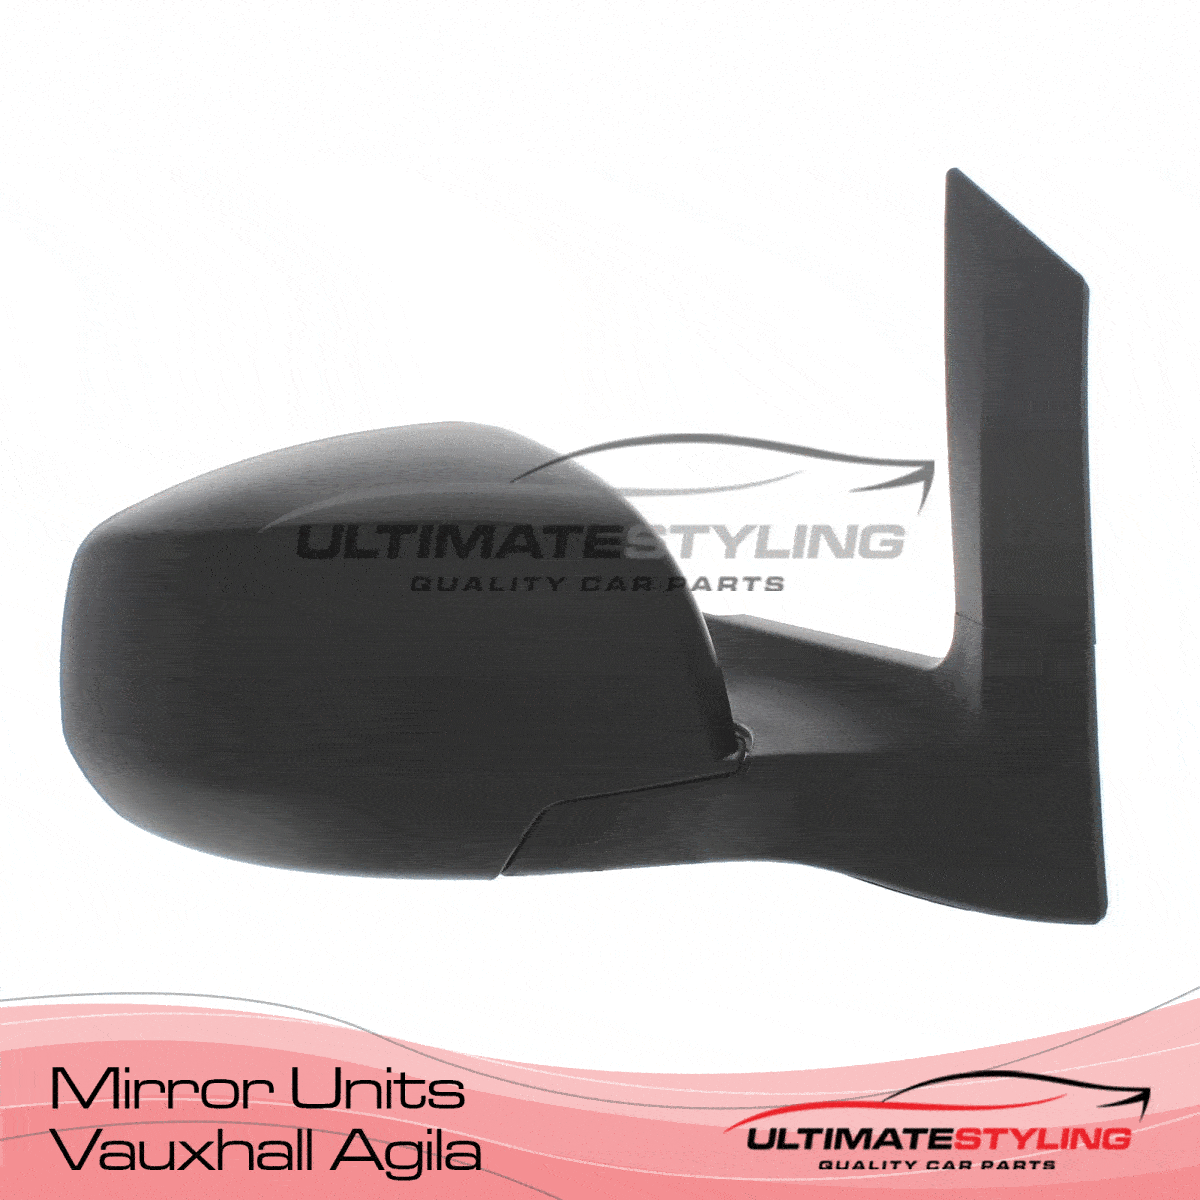 360 view of a Vauxhall Agila wing mirror replacement